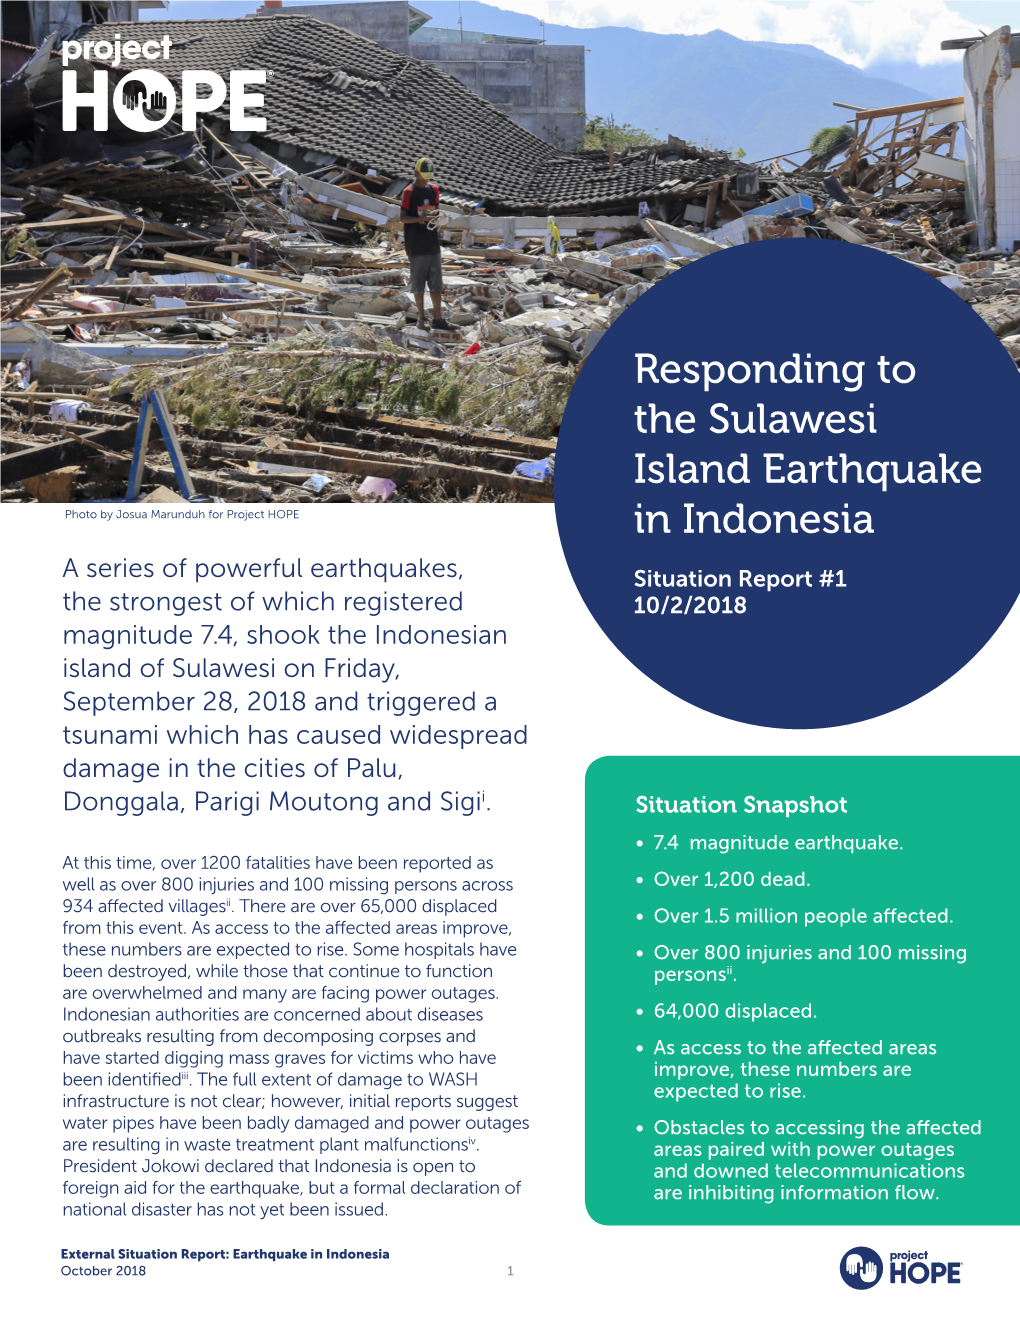 Responding to the Sulawesi Island Earthquake in Indonesia